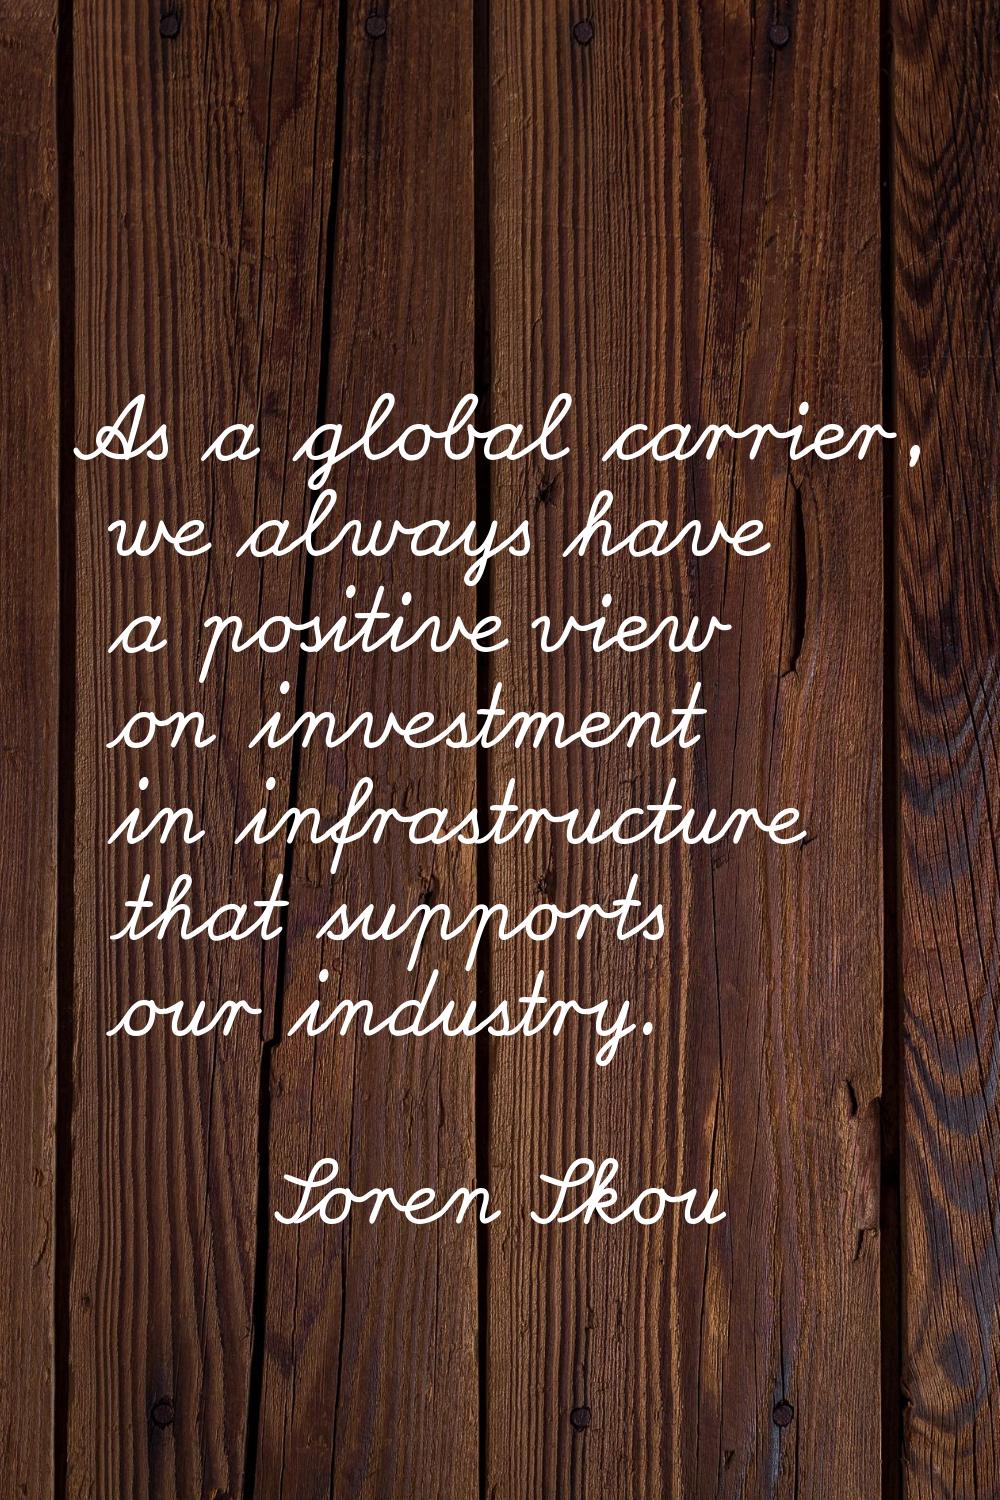 As a global carrier, we always have a positive view on investment in infrastructure that supports o